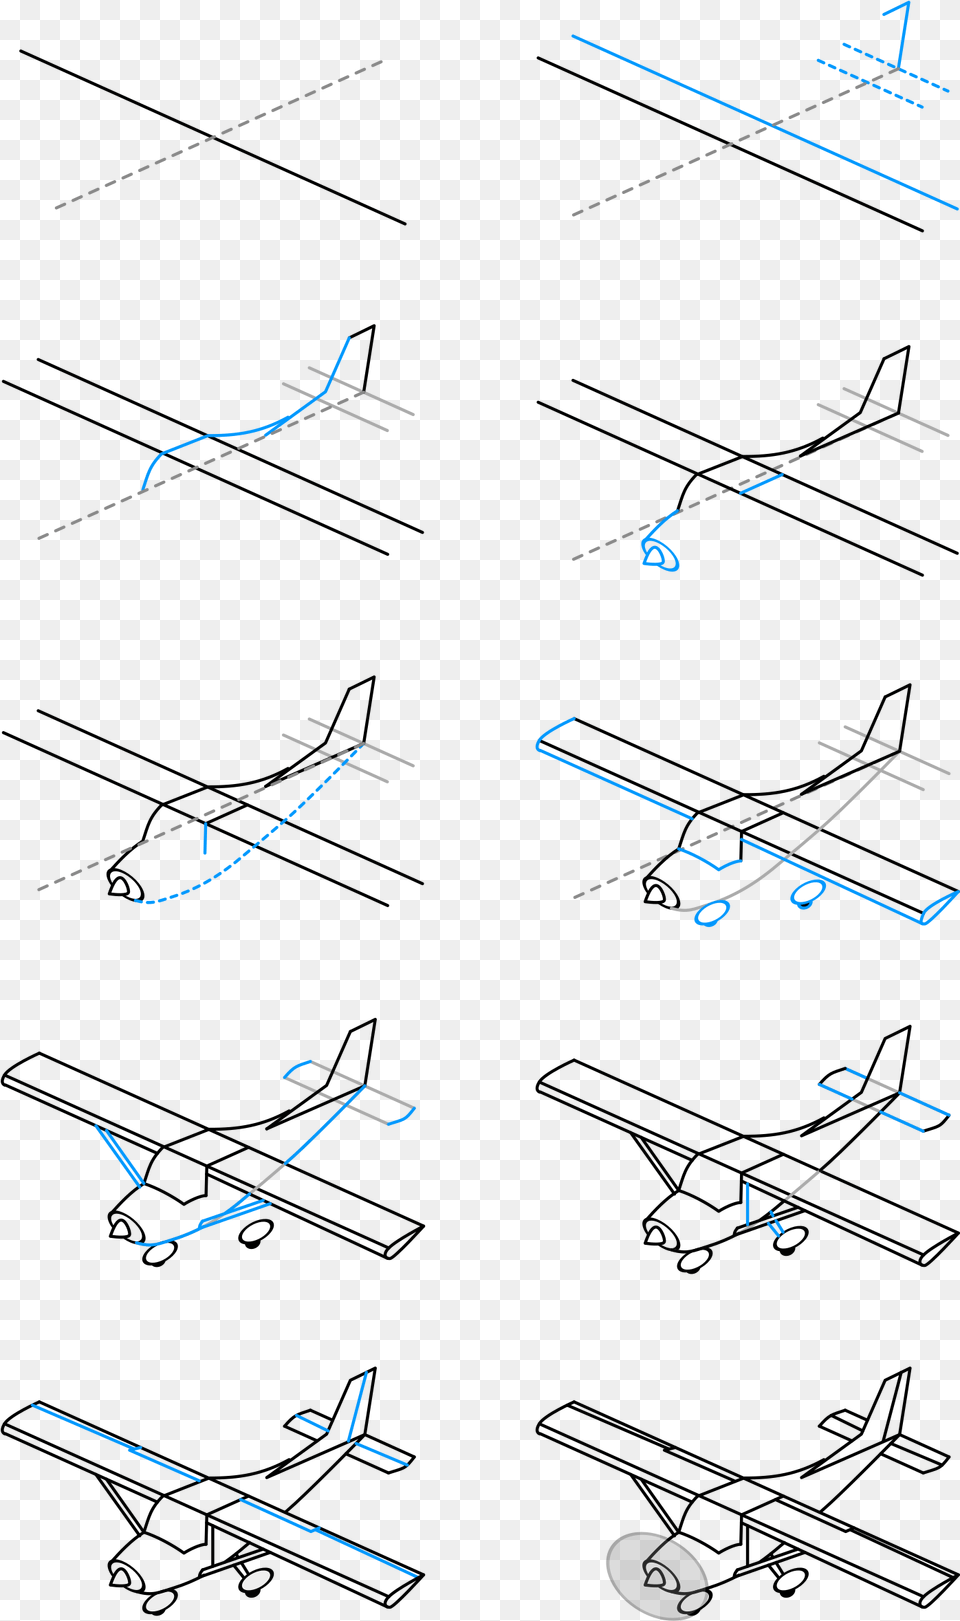 Draw A Single Engine Airplane Clip Arts 3d Airplane Drawing Step By Step, Cad Diagram, Diagram Free Transparent Png